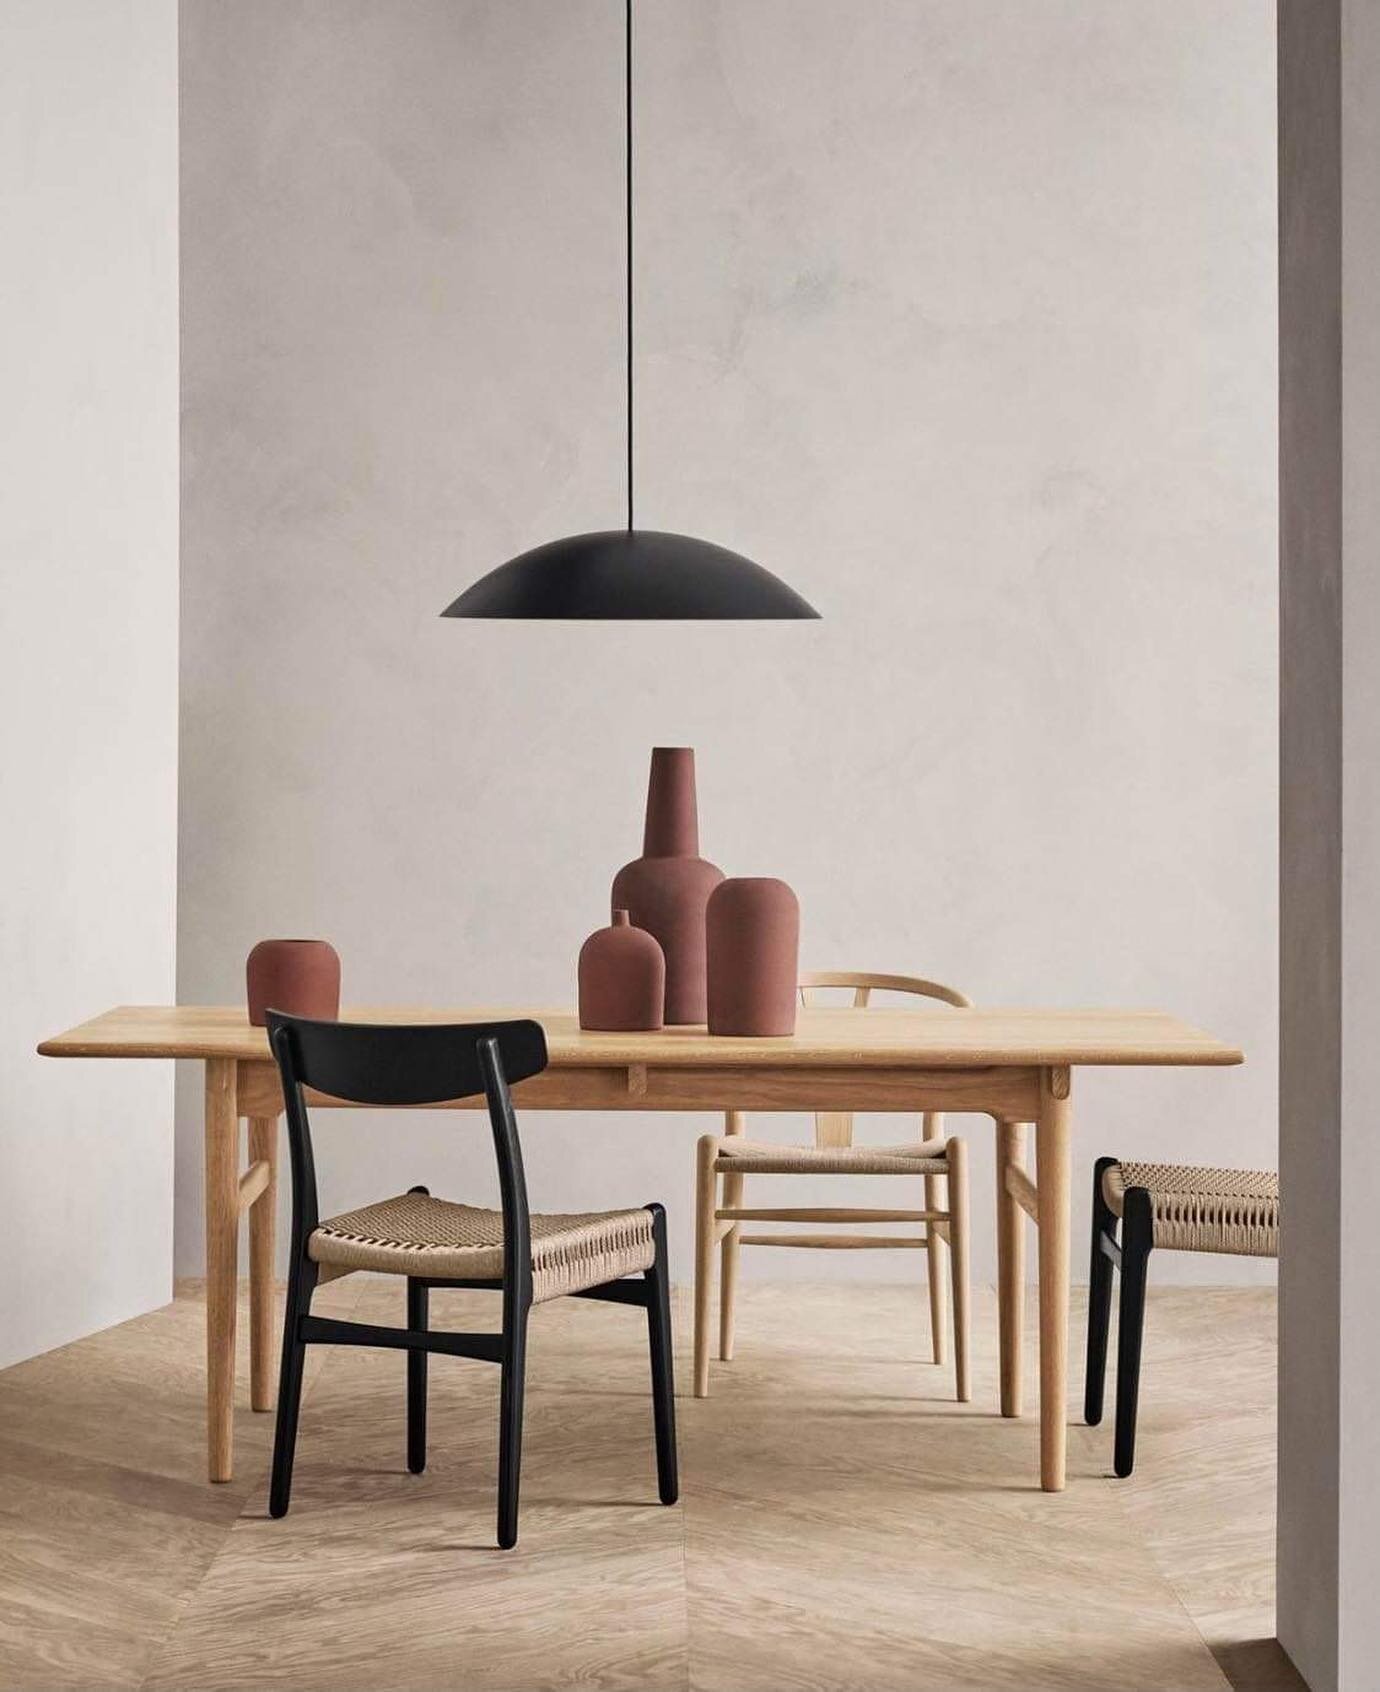 Did you know that we sell Carl Hansen &amp; S&oslash;n ? We have samples of all the colours and wood types in the showroom. If you need help to decide on colours or wood we can bring them to your home if you live in the region.
*
**
***
#cabaneblanch